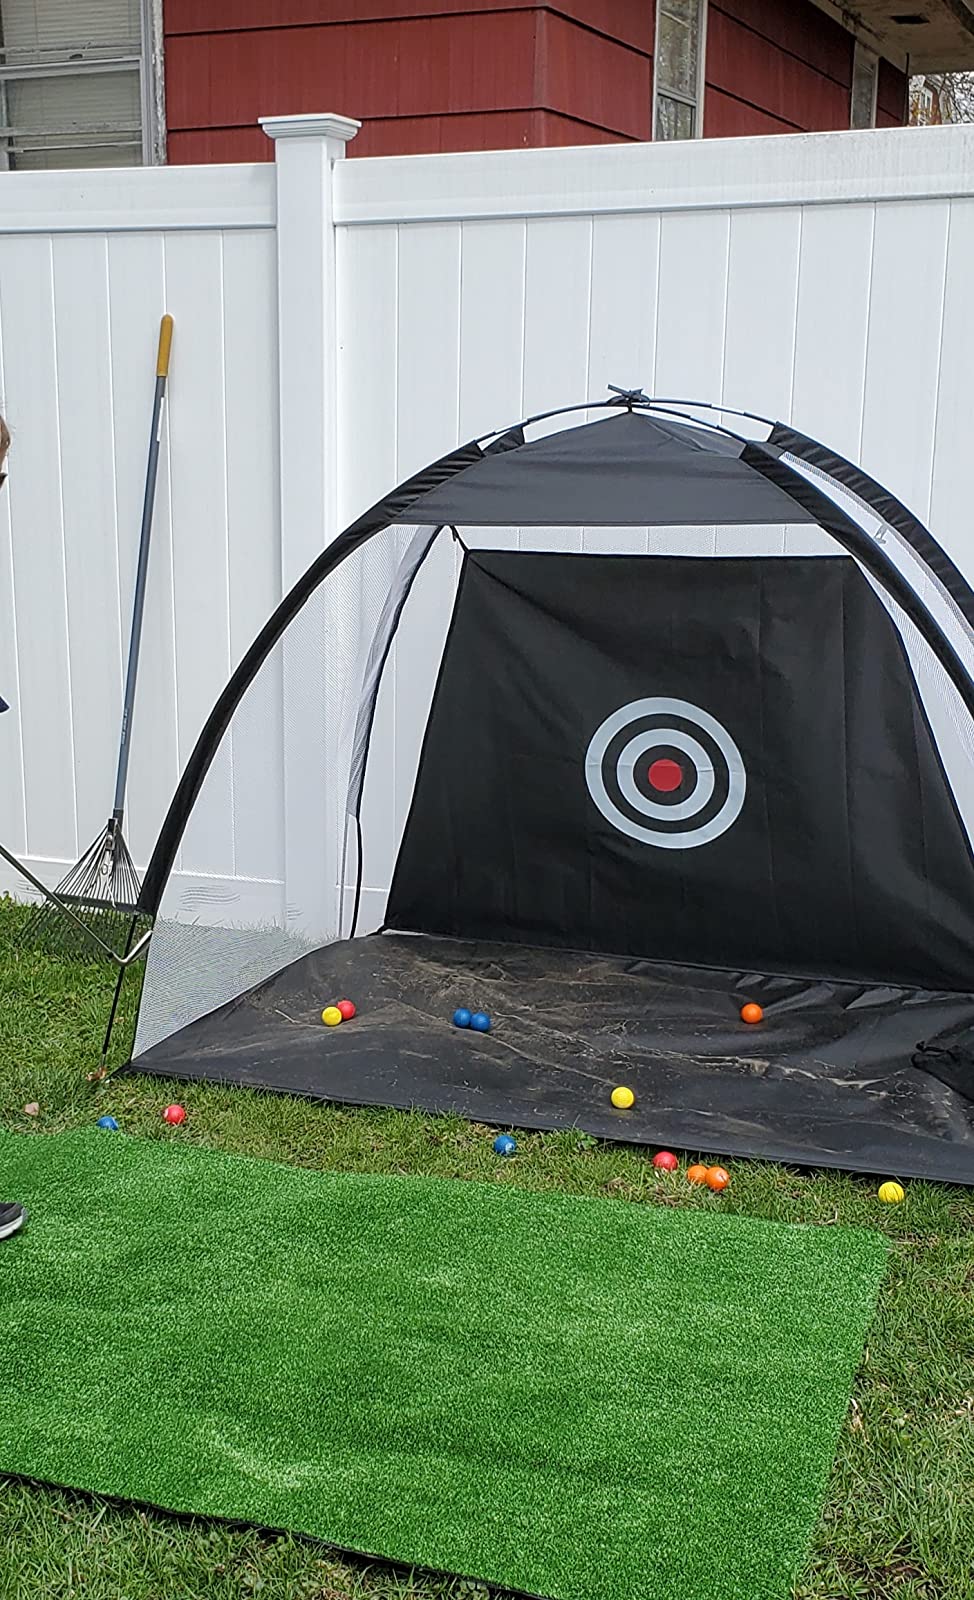 Golf Cage Swing Training Set - Hitting Practice Golf Net photo review